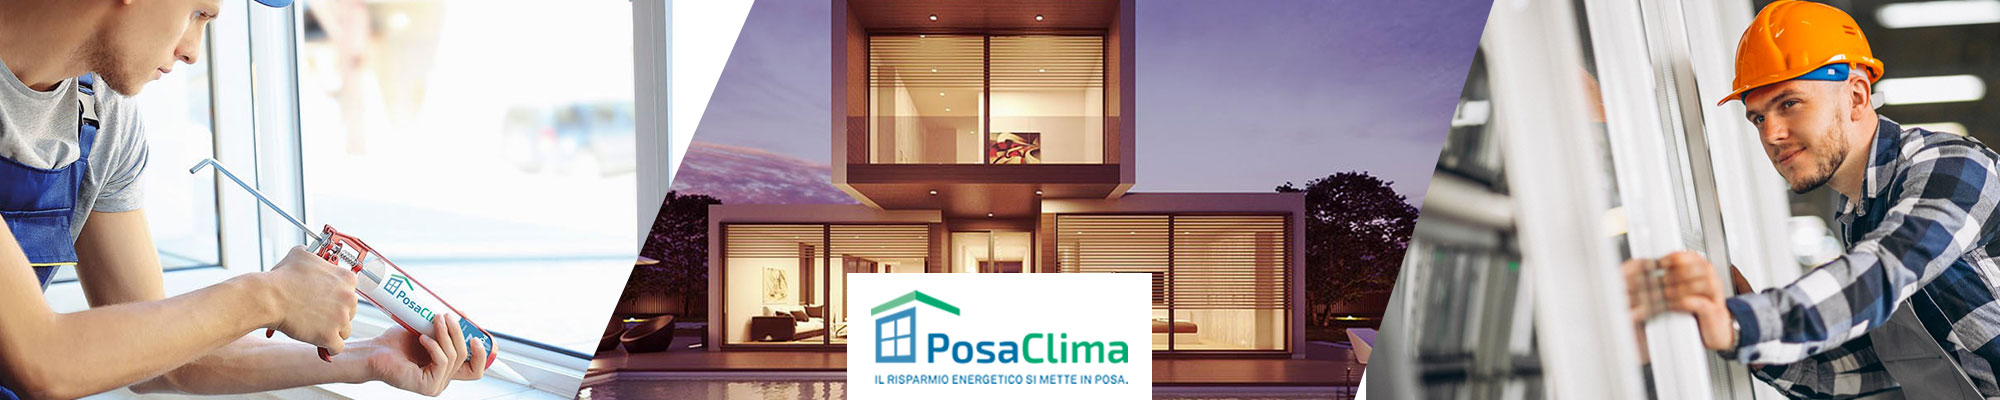 PosaClima Products for Energy Efficiency Windows